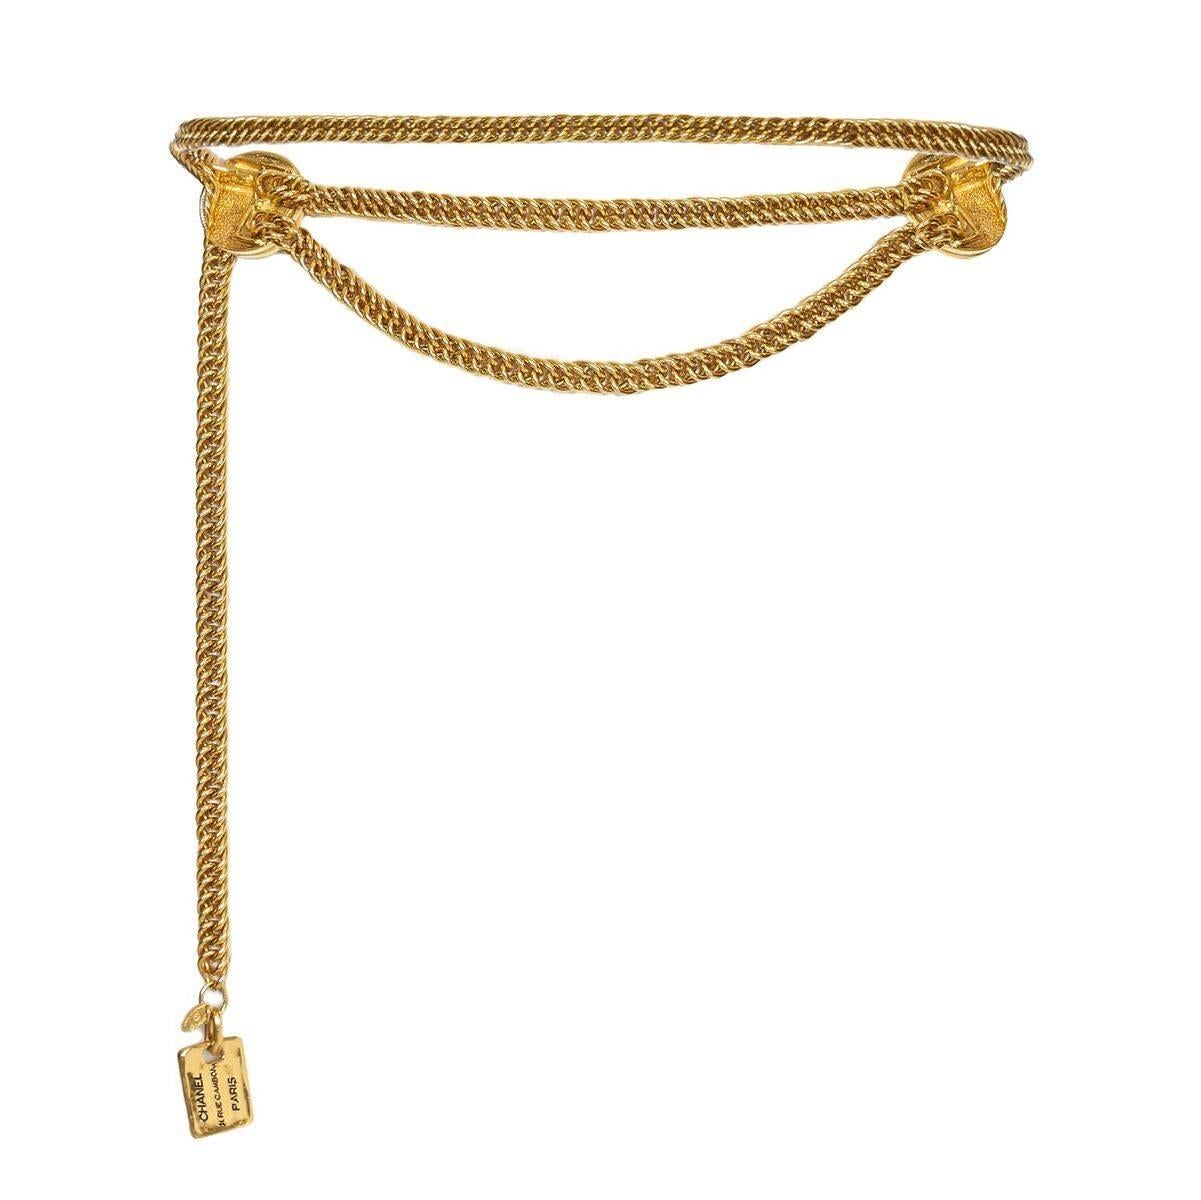 This timeless 1980s 31 Rue Cambon chain belt from Chanel features 2 x 31 Rue Cambon embossed disc medallions. There is a concealed hook fastening behind the medallion to the left that attaches over the chain at any point so that the length is